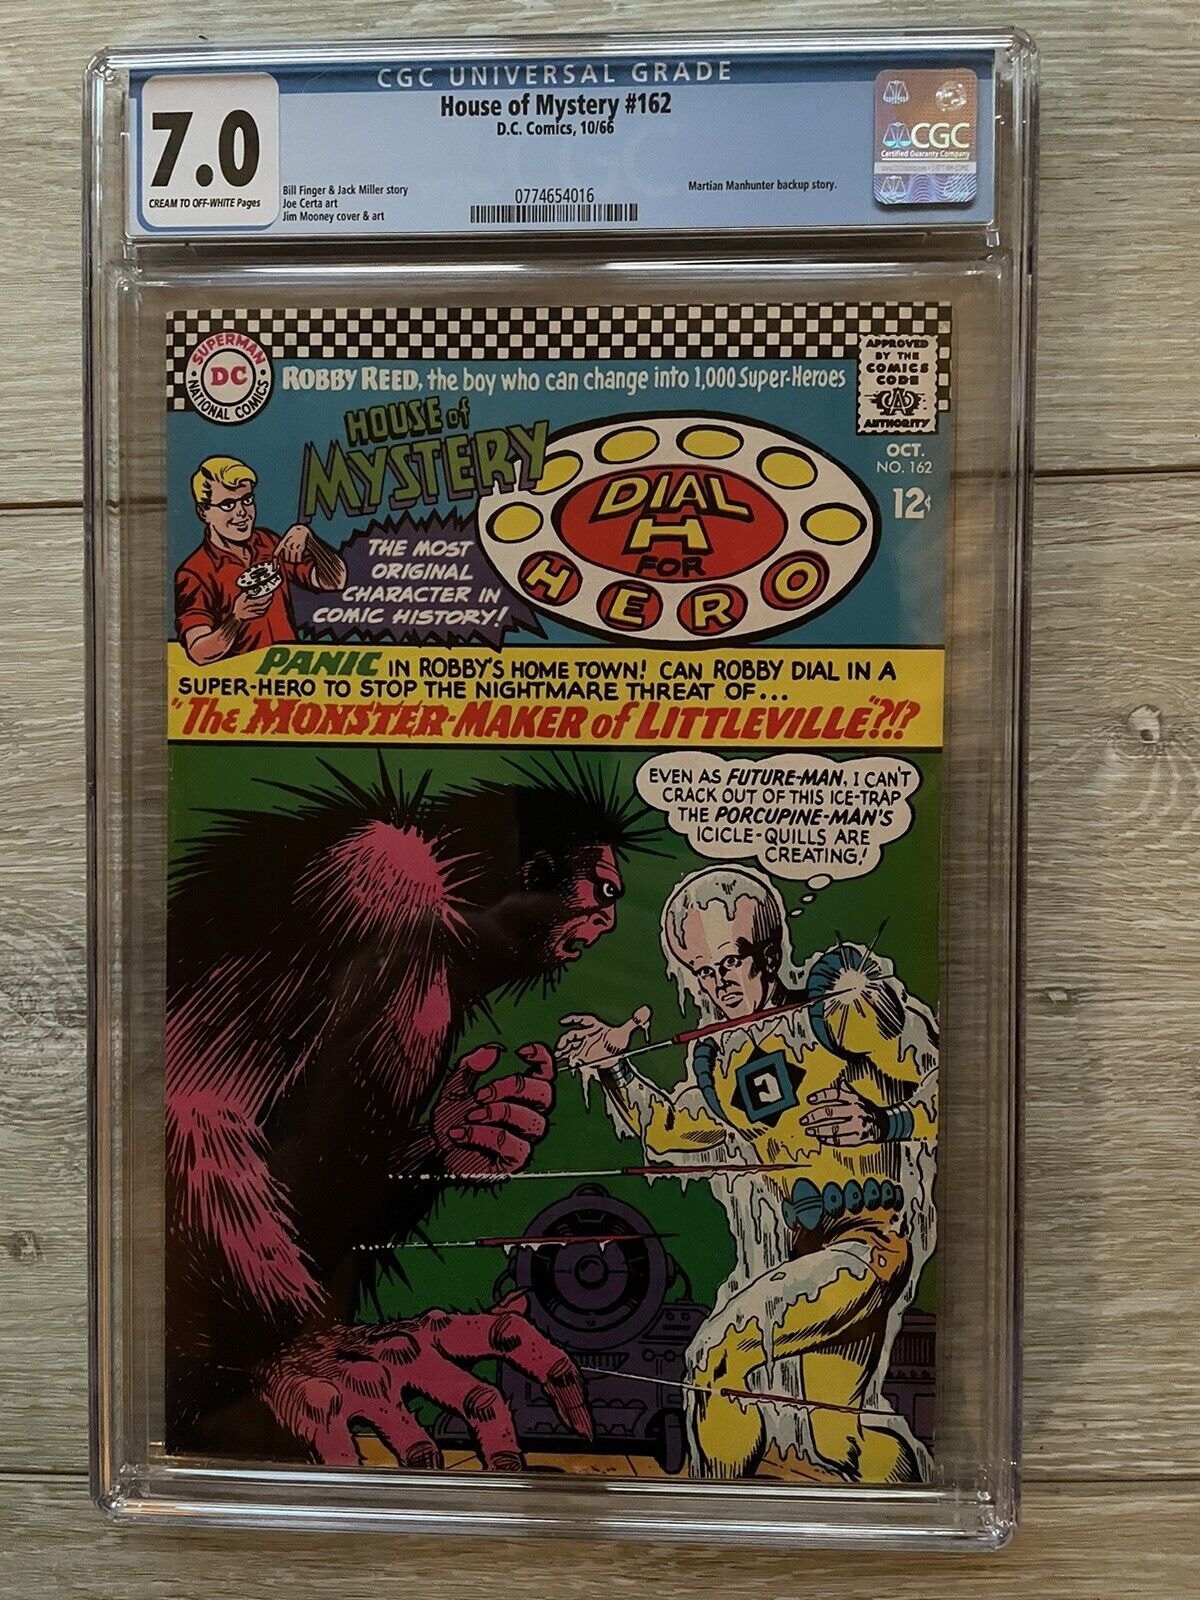 House of Mystery #162 Dial H for Hero Robby Reed 1966 DC - CGC Universal Grade